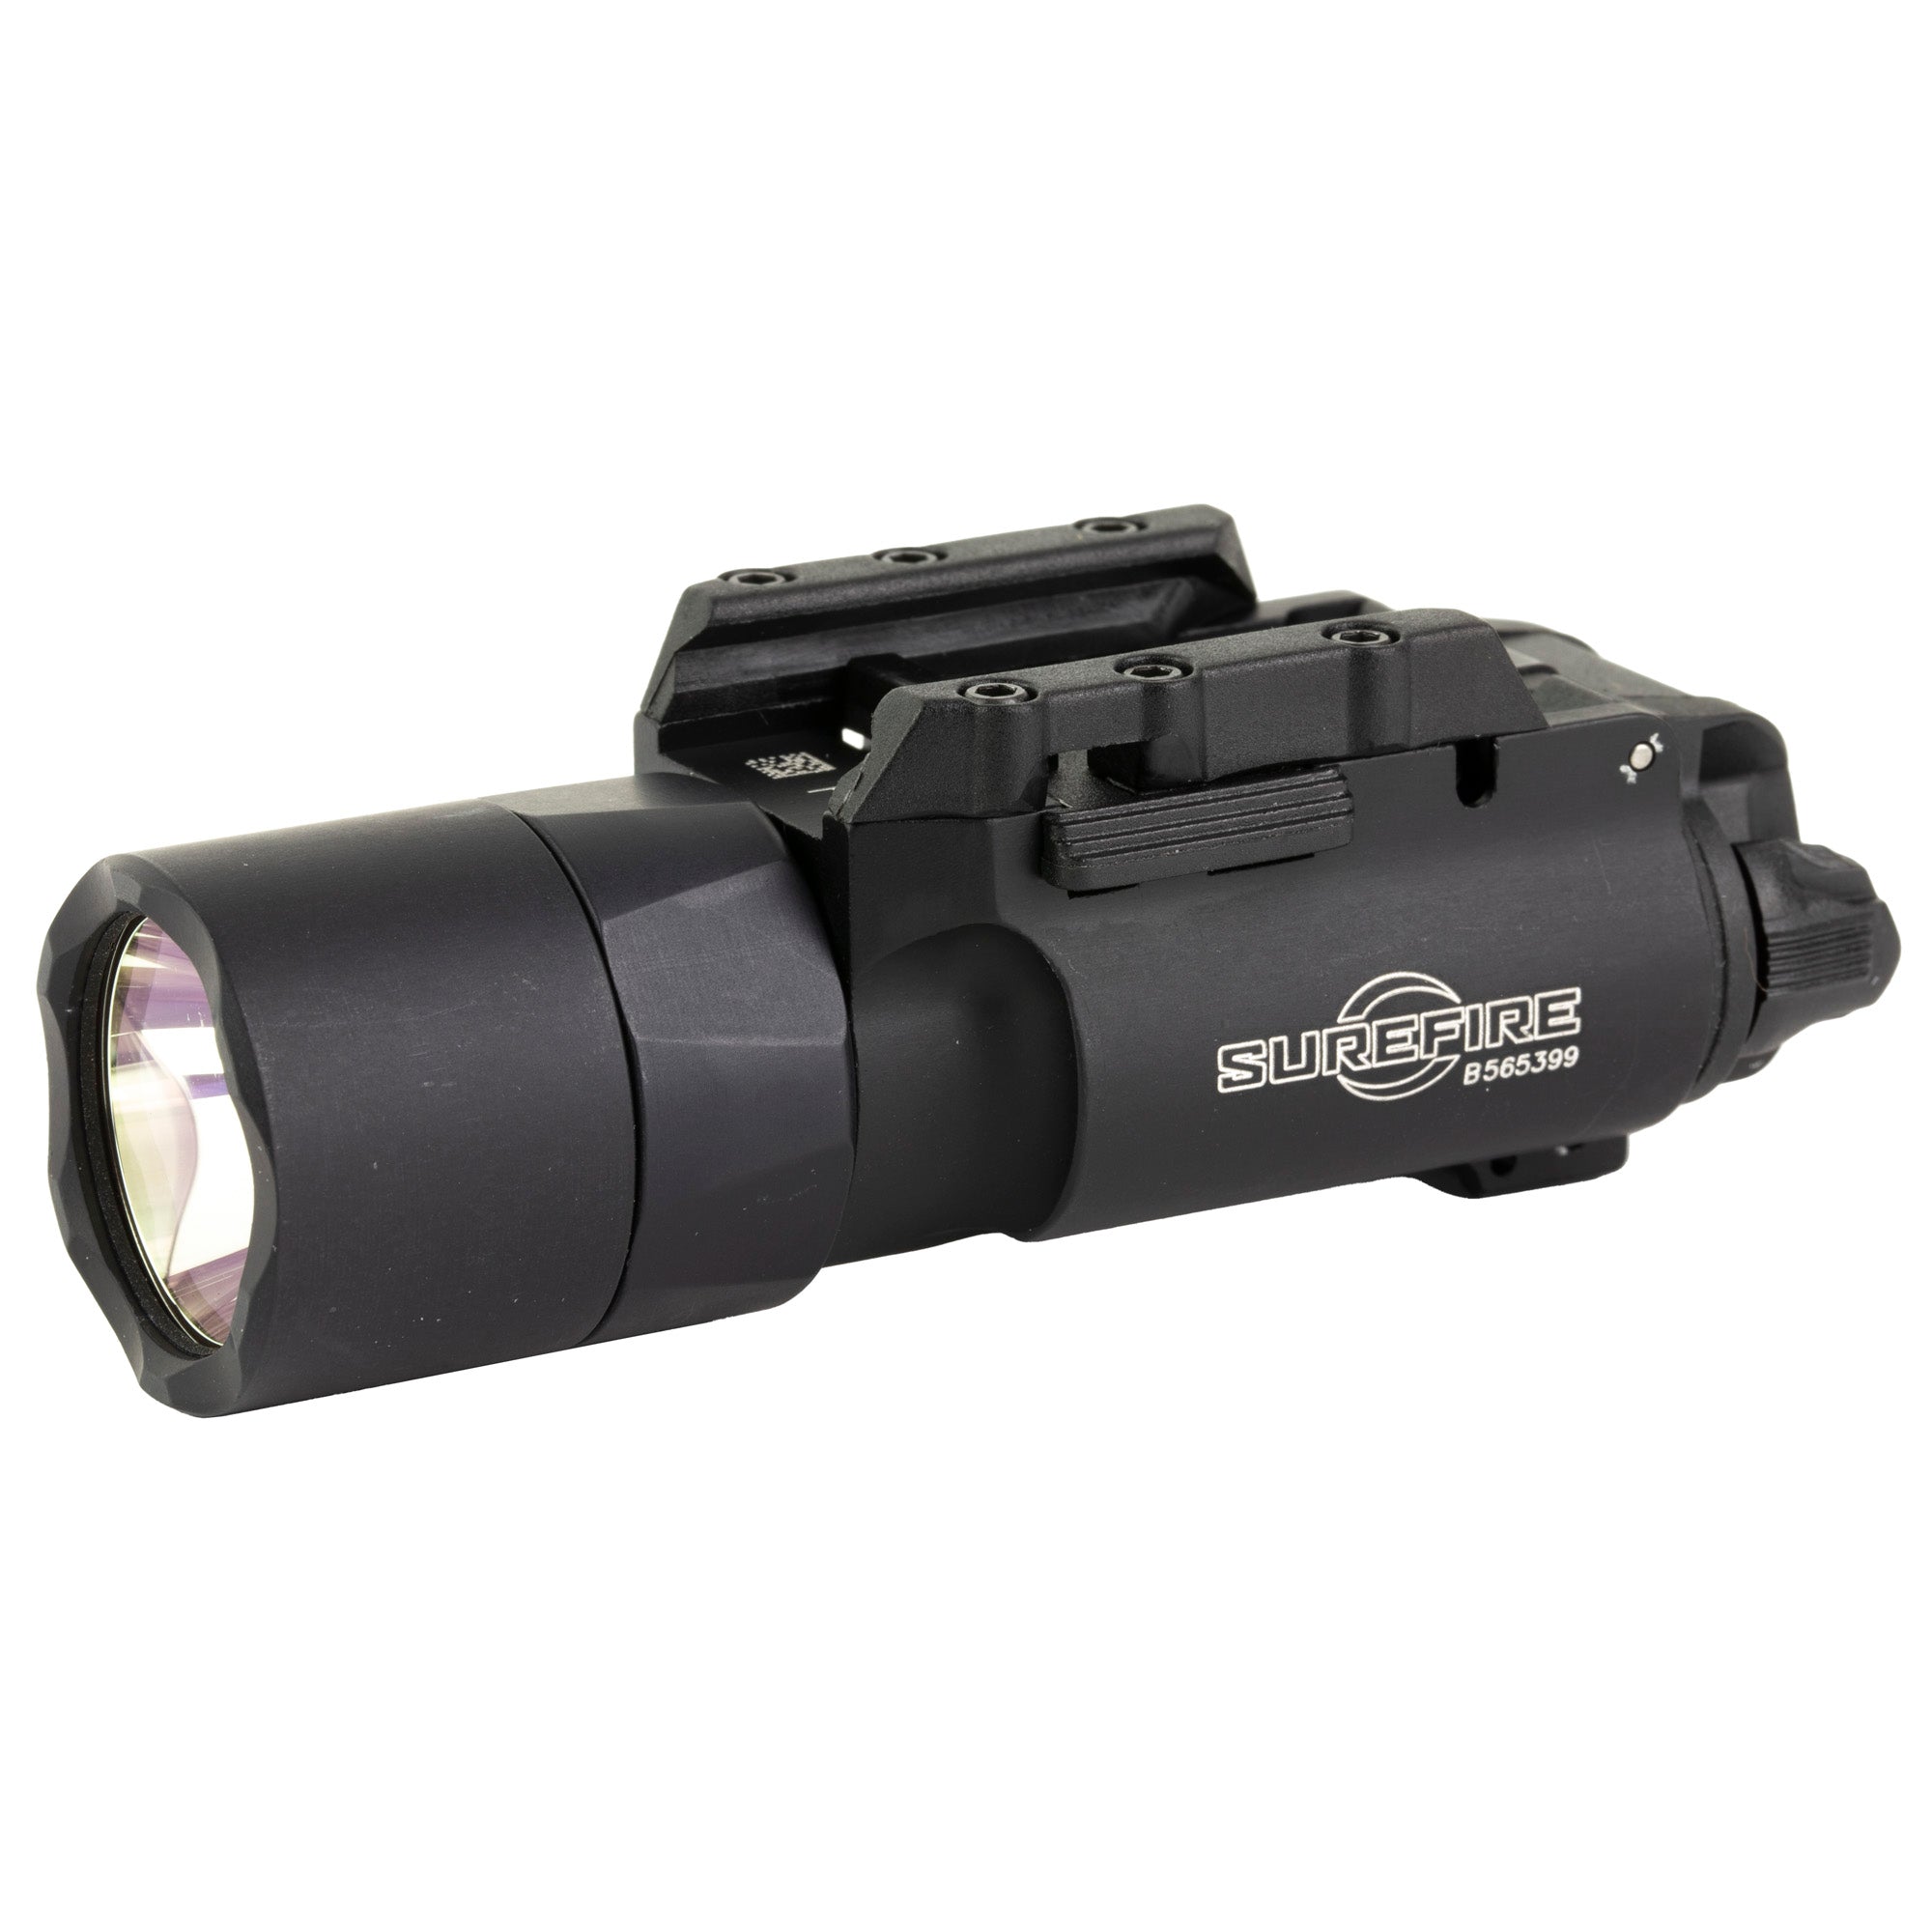 SureFire X300T-A Tactical Weapon Light – Unmatched Performance and 